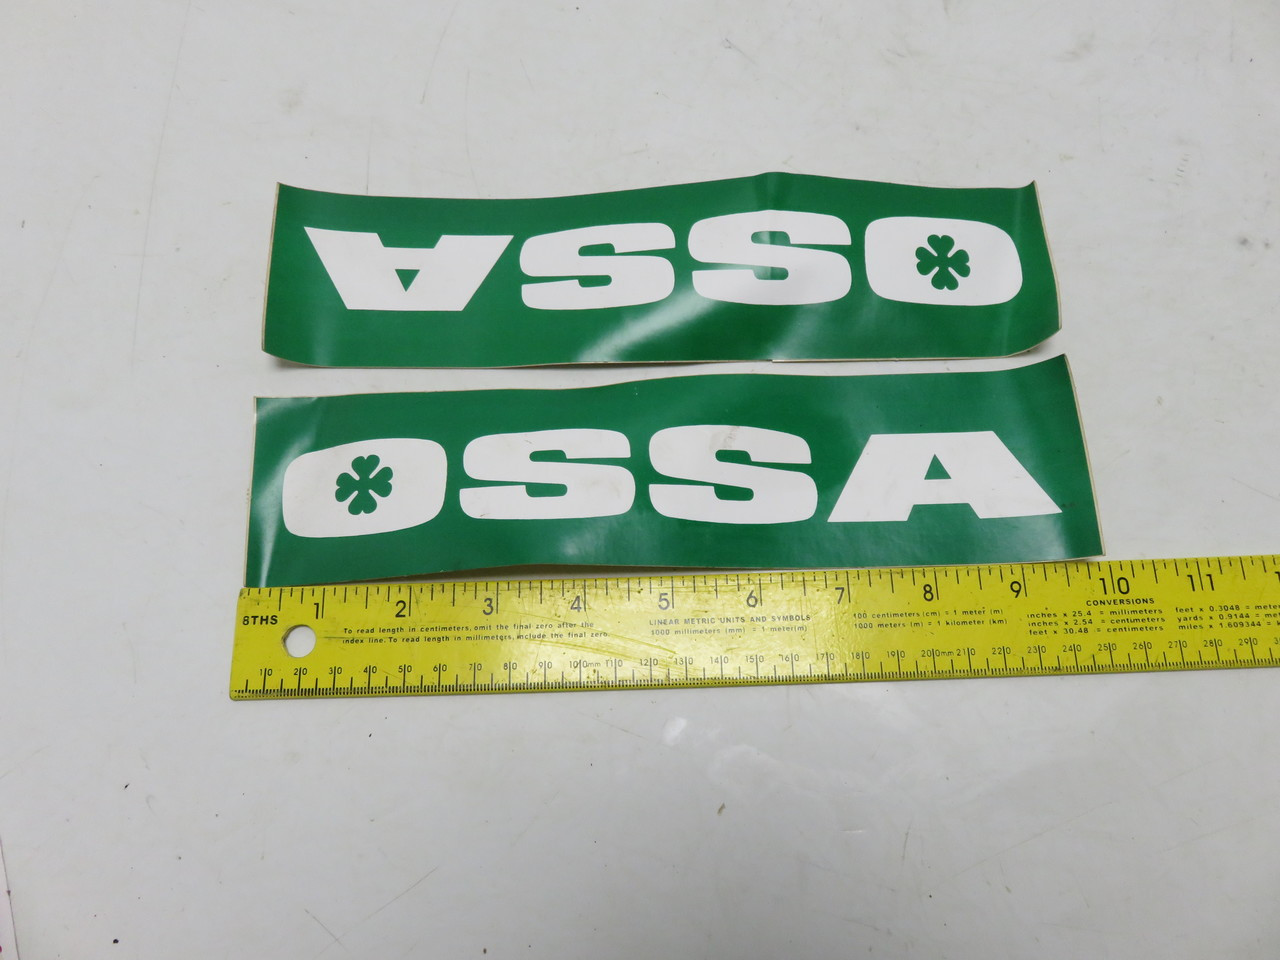 Vintage Ossa Stickers Green Motorcycle (pair) decal